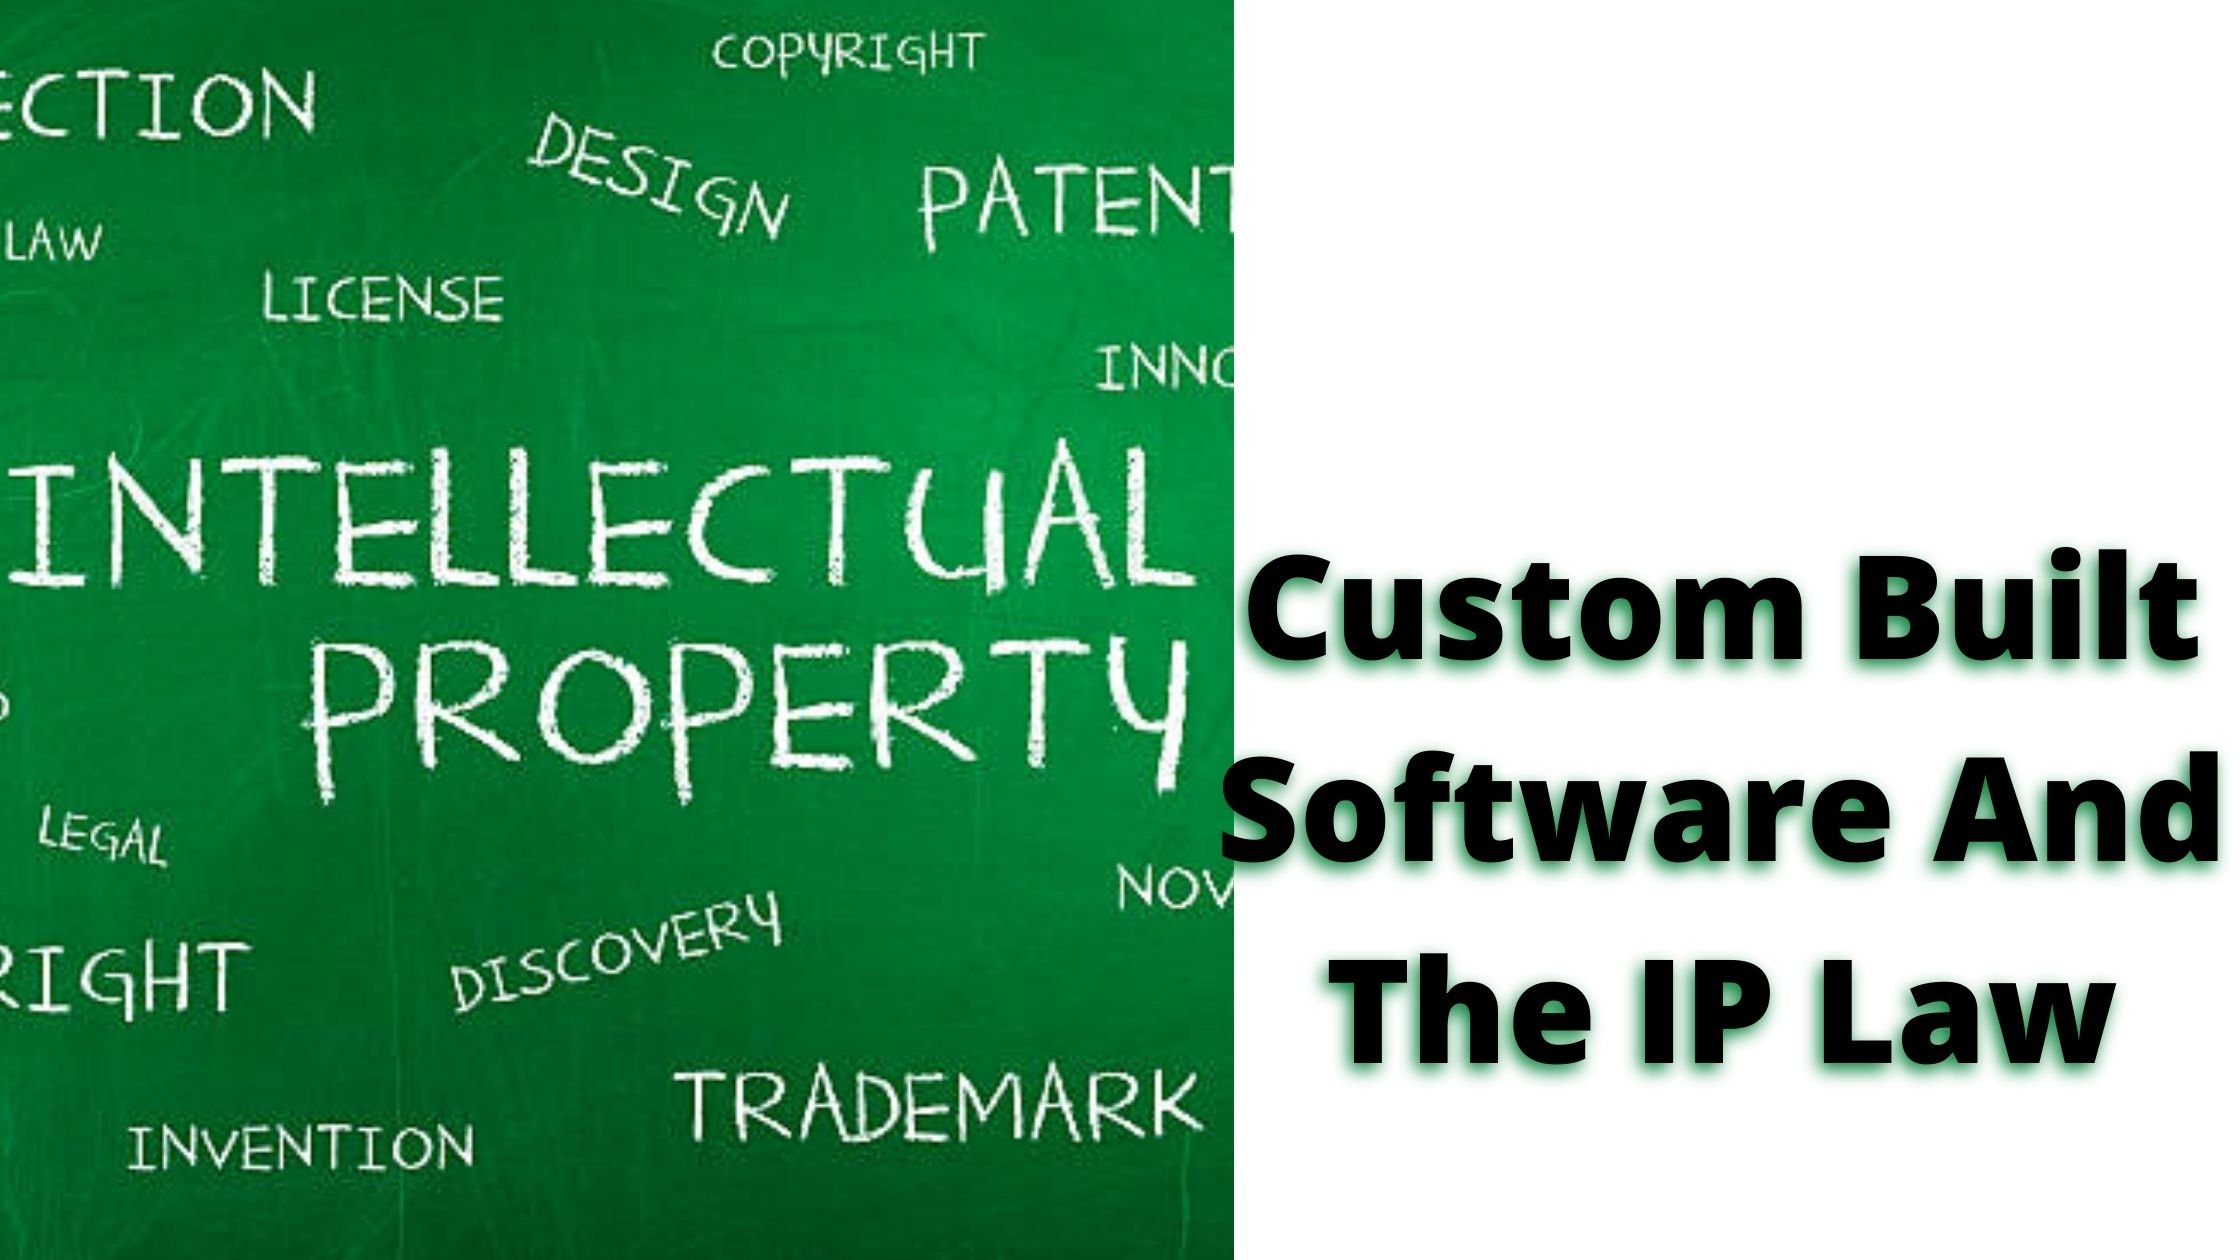 Custom Built Software And The IP Law – What You Need To Know